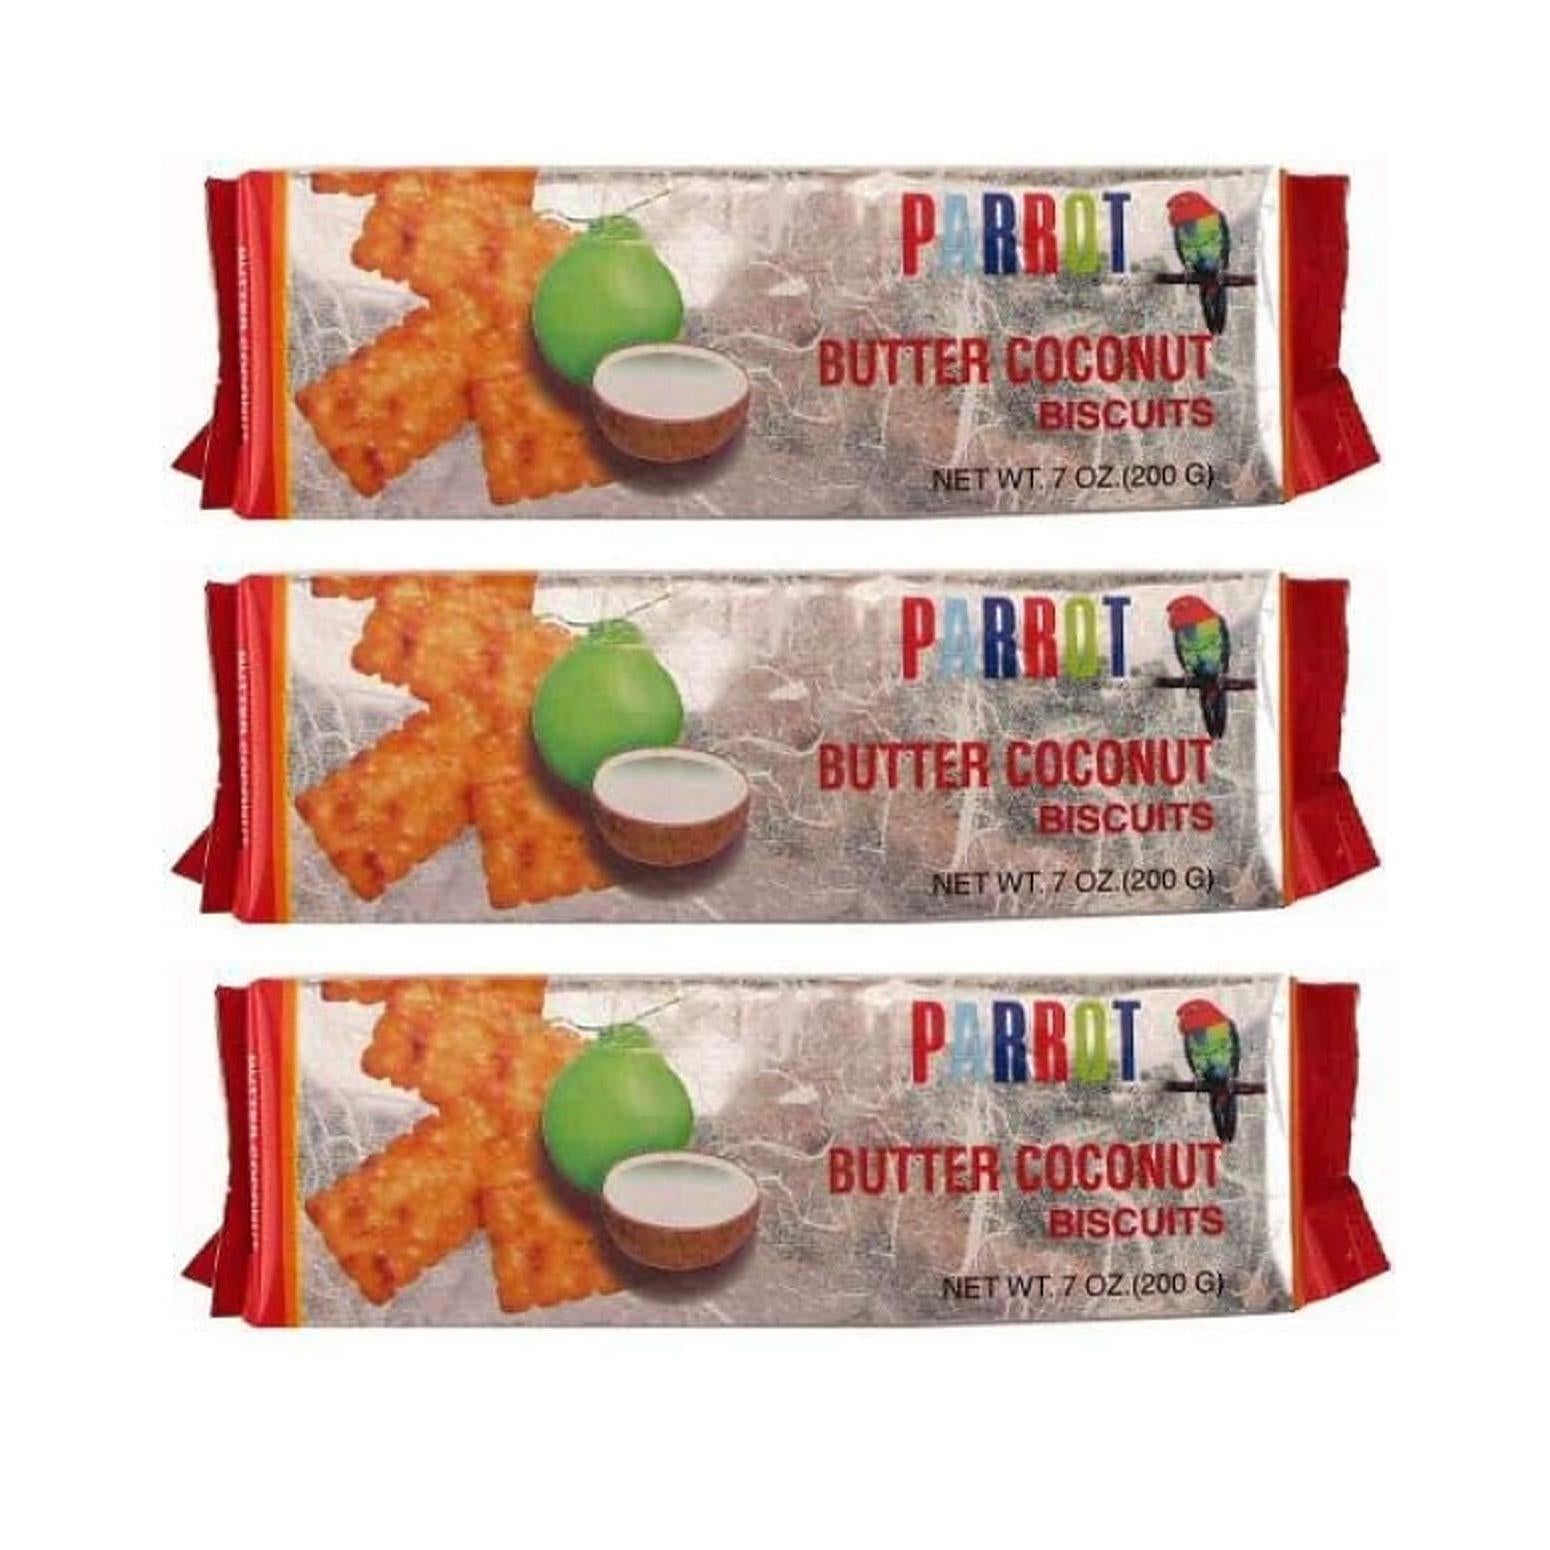 Parrot Butter Coconut Biscuits (3 Pack, Total of 21oz)